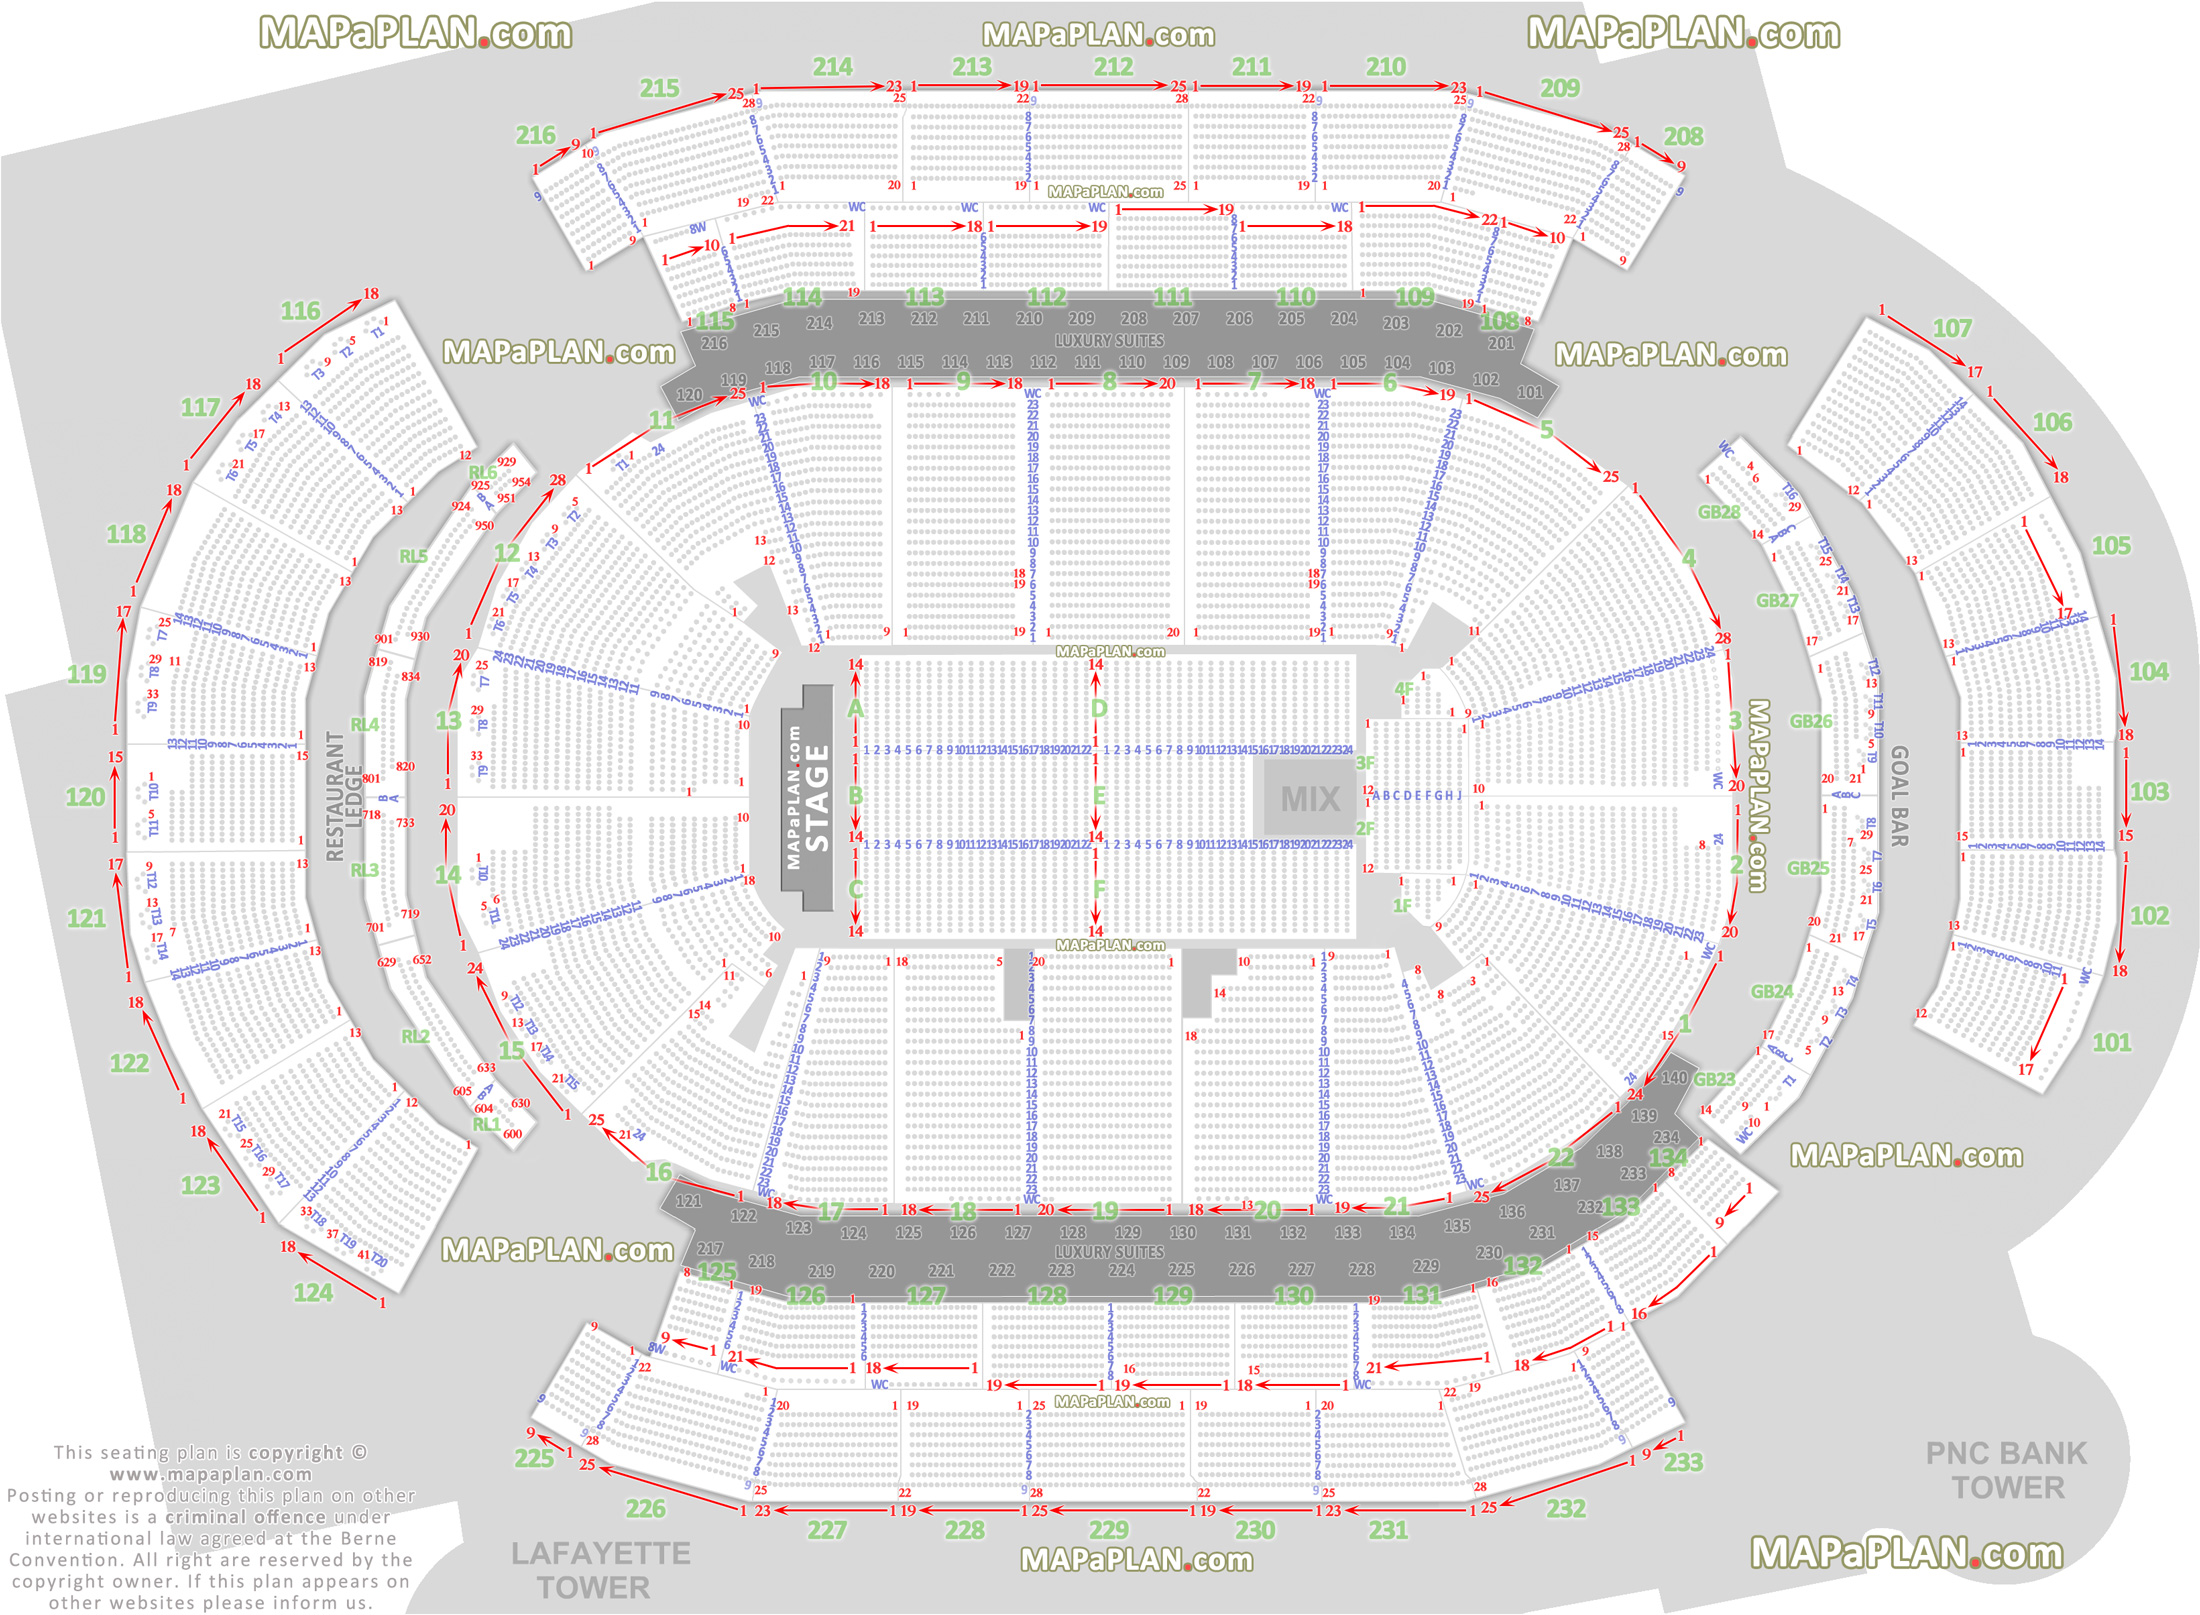 New Jersey Devils Seating Chart View